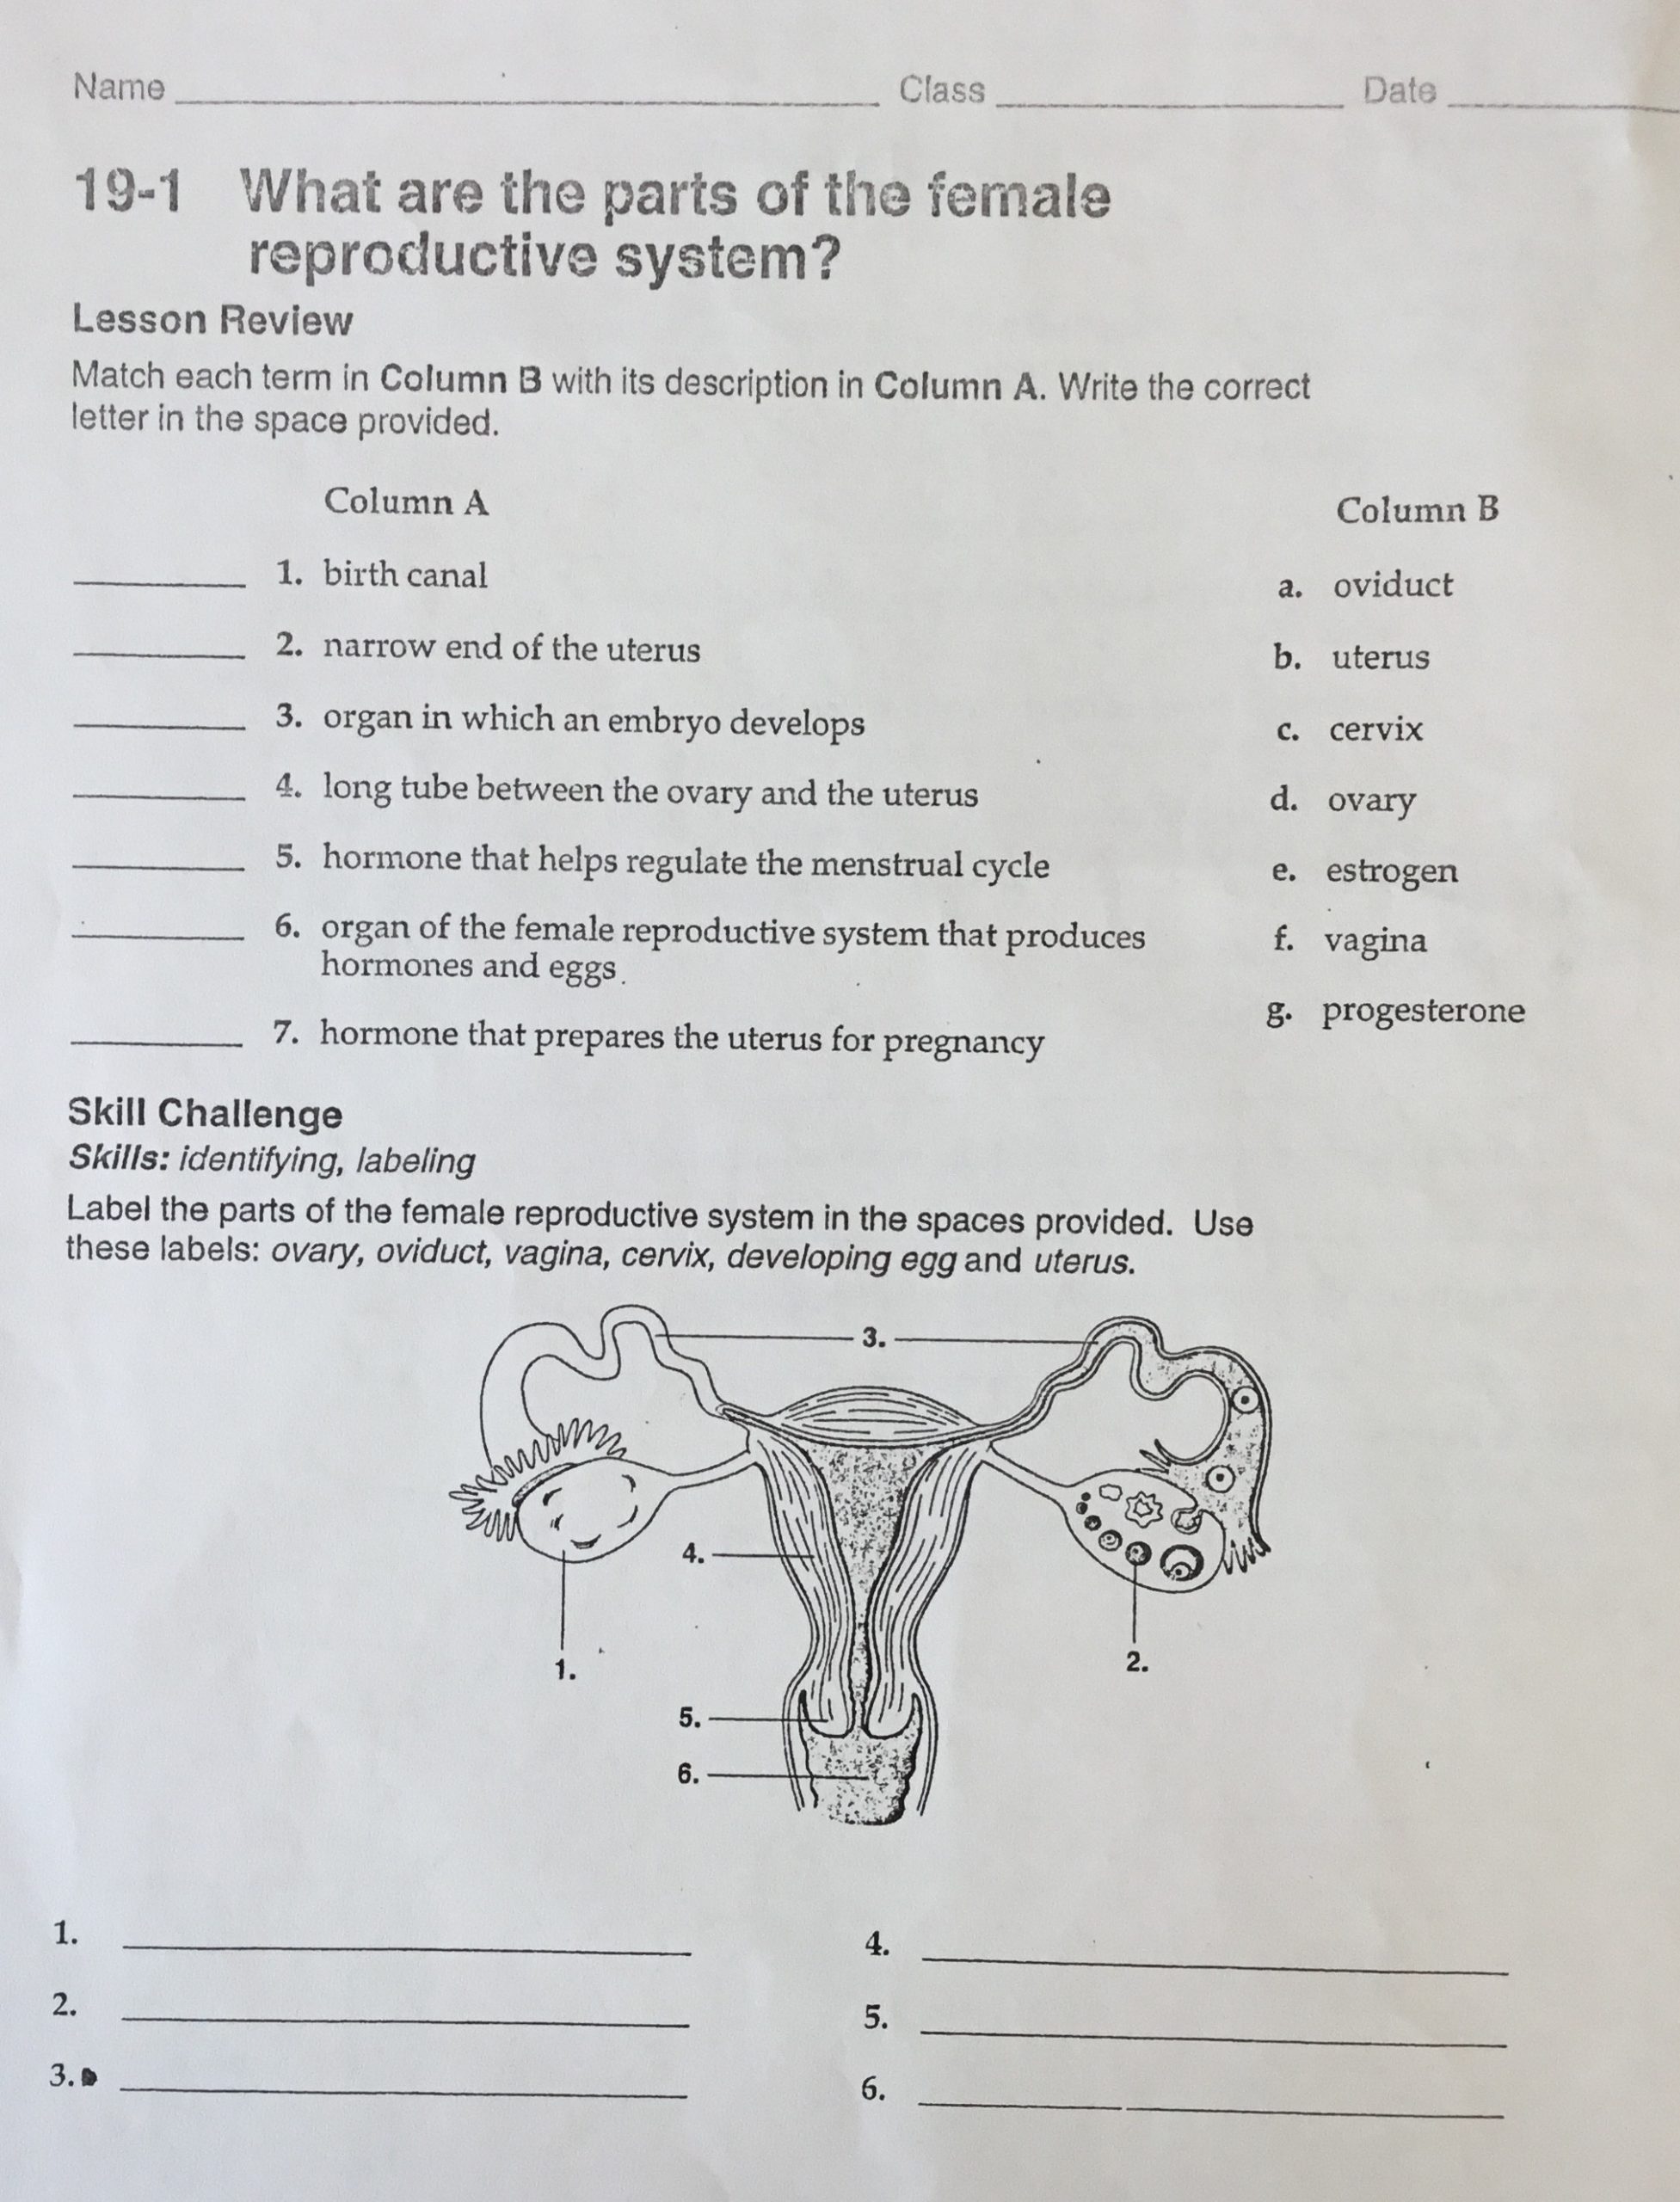 The Female Reproductive System Worksheet Holdcroft S Reproduction and Development